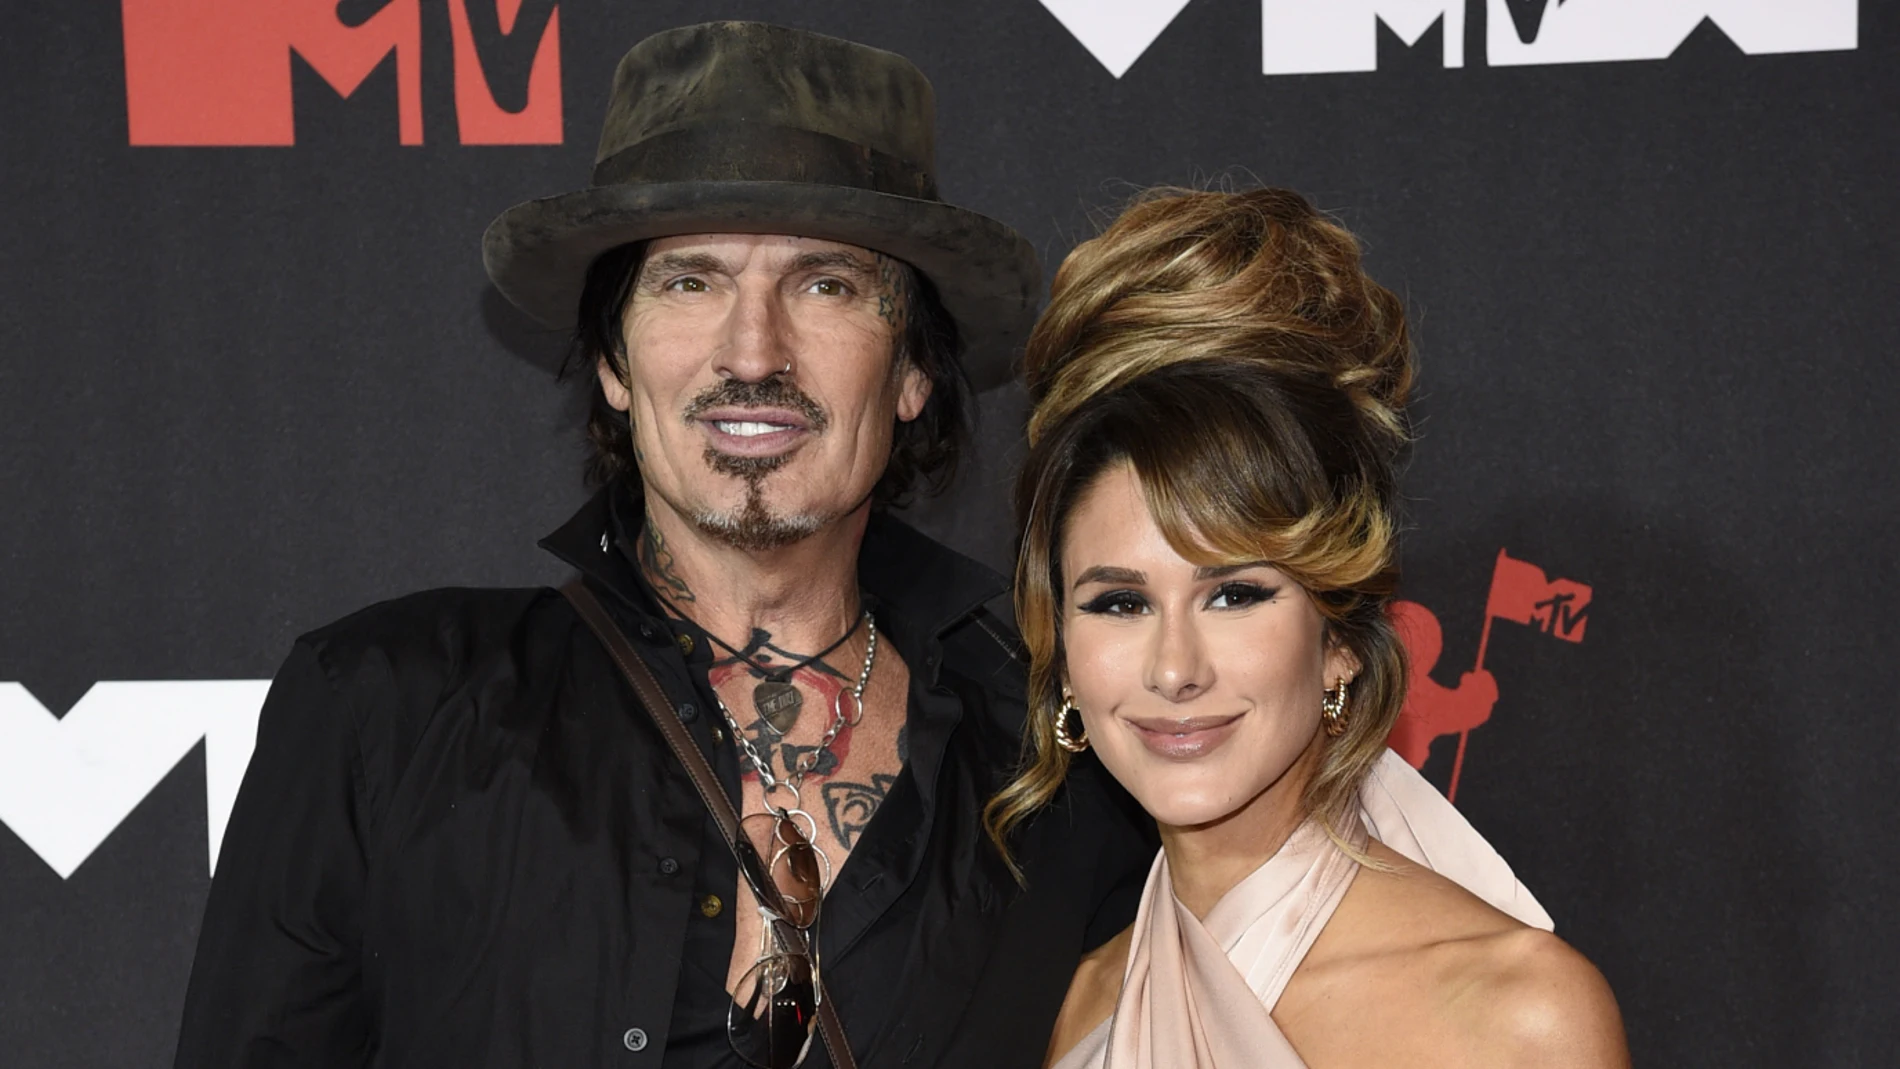 Singer Tommy Lee, , and Brittany Furlan at the MTV Video Music Awards on Sunday, Sept. 12, 2021, in New York.